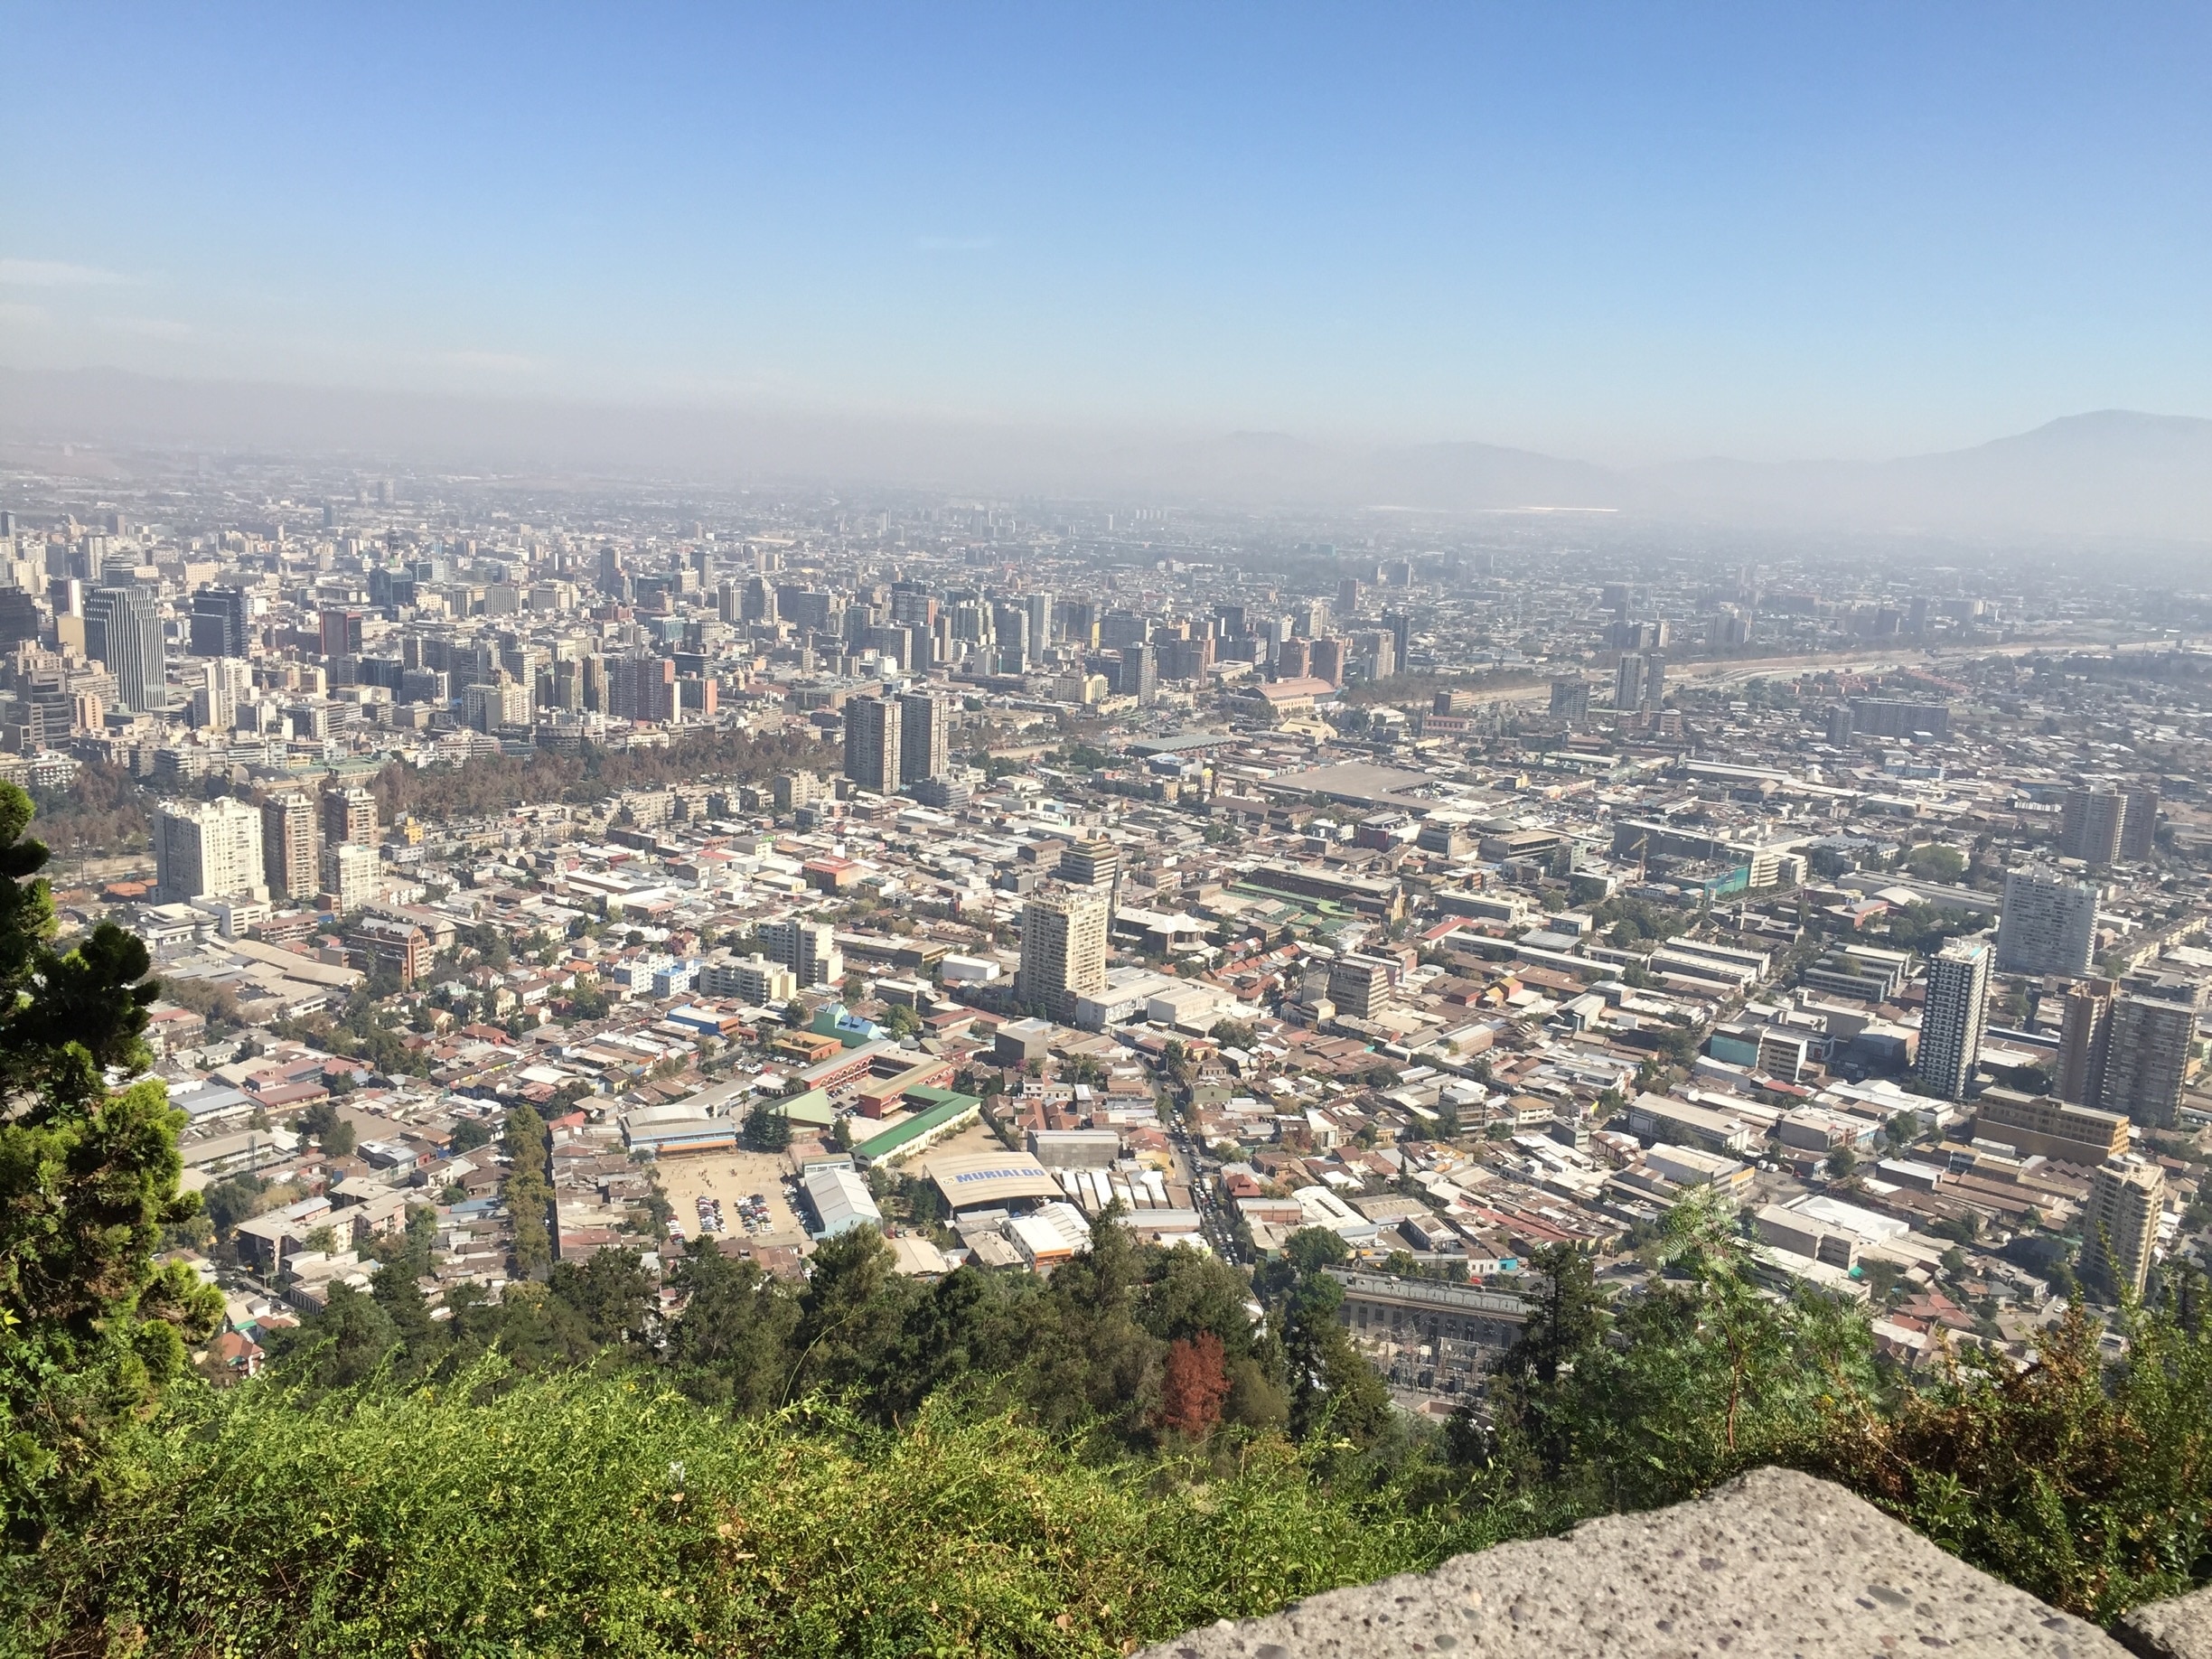 Santiago de Chile. View from the top 